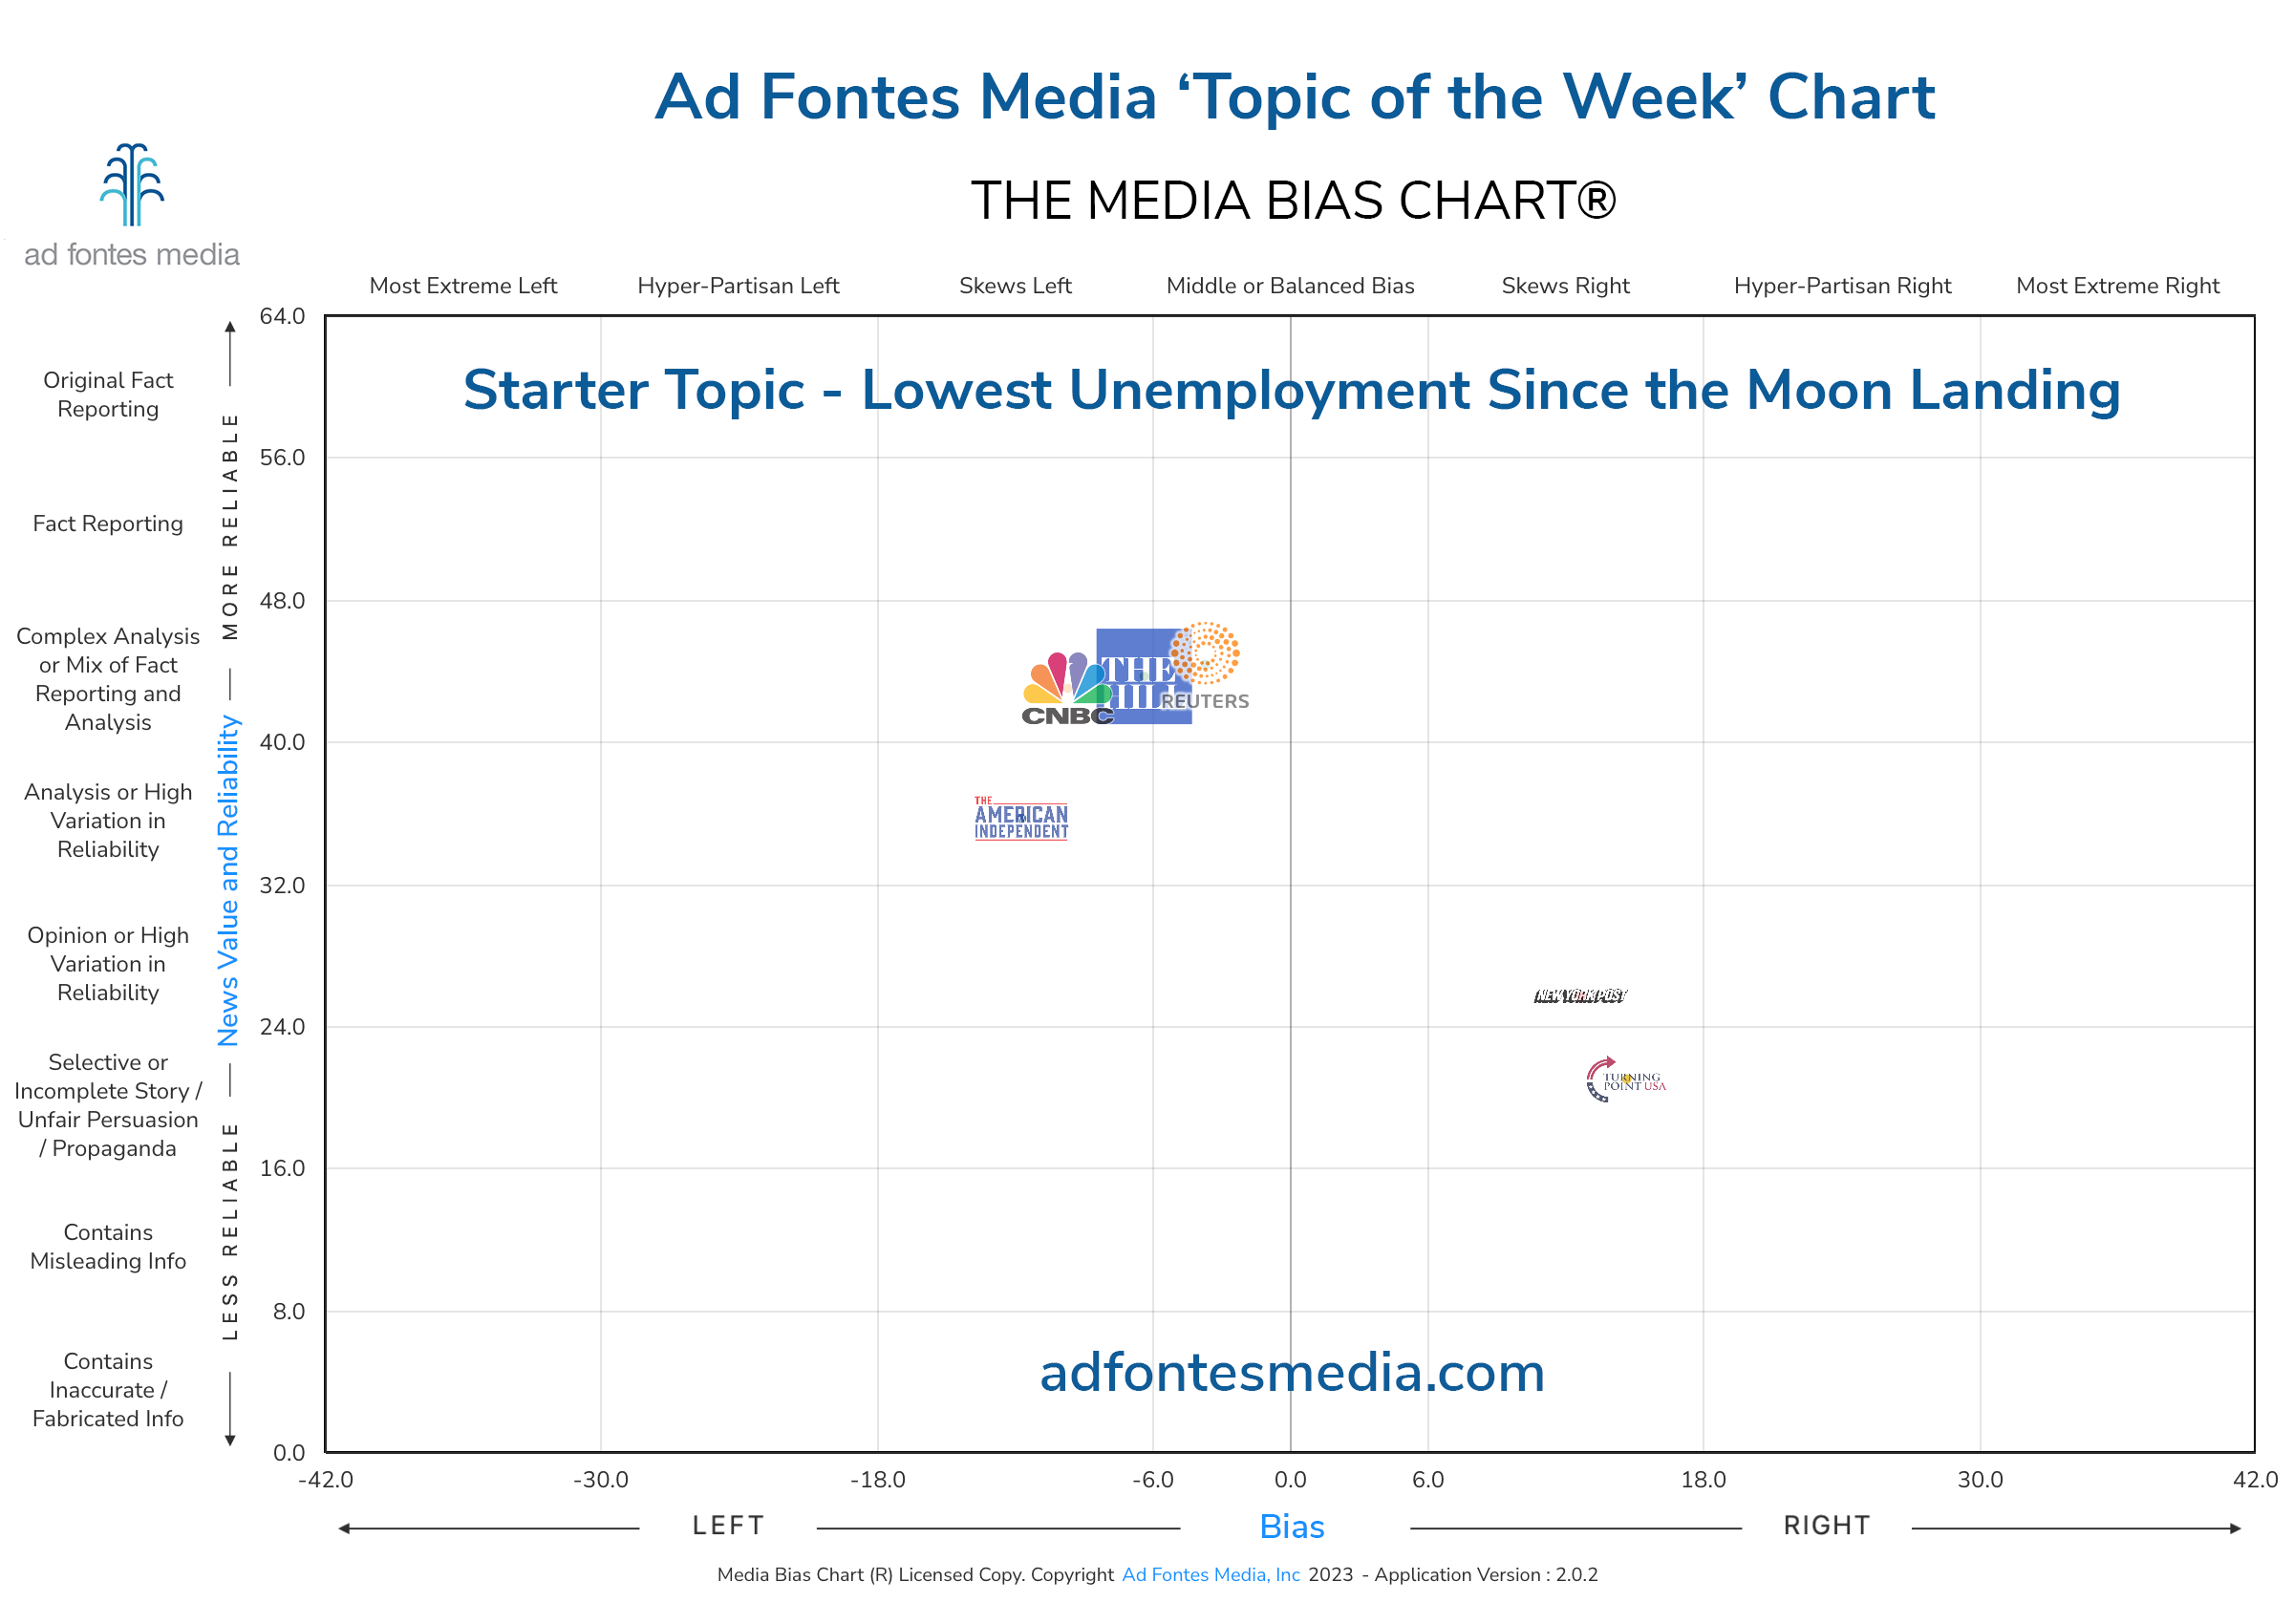 Scores of the Lowest Unemployment Since the Moon Landing articles on the chart